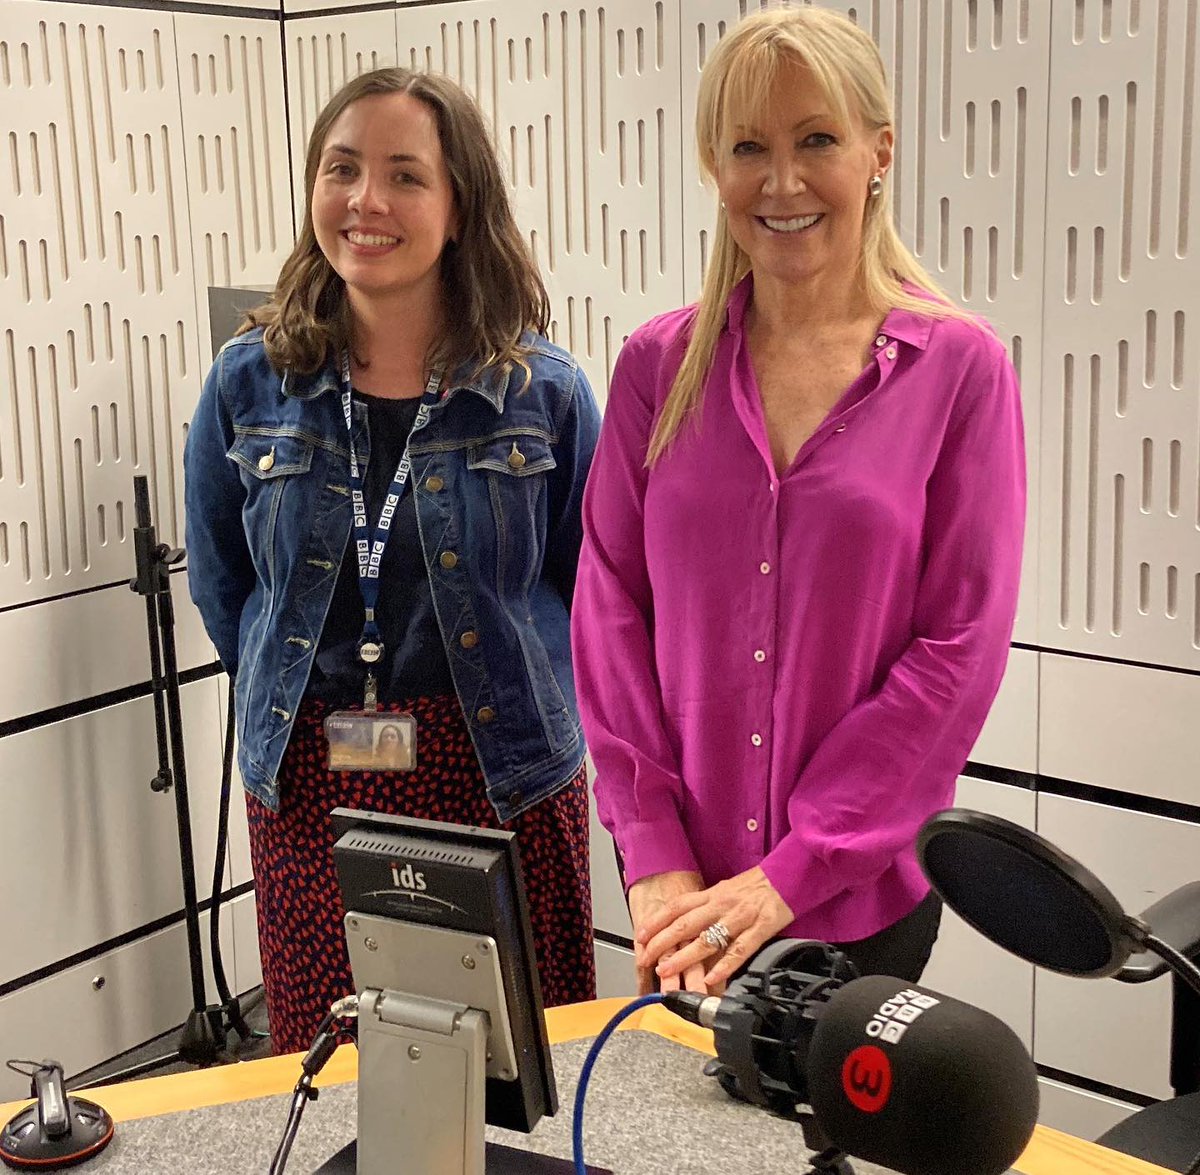 Last week, Suzi was in the studio recording her show for @BBCRadio3 Inside Music, sharing the inside scoop on some of her top picks including a track from our new album! Tune in on Saturday 28th October at 1pm! @TandemProUK @harmoniamundi @suzidigby